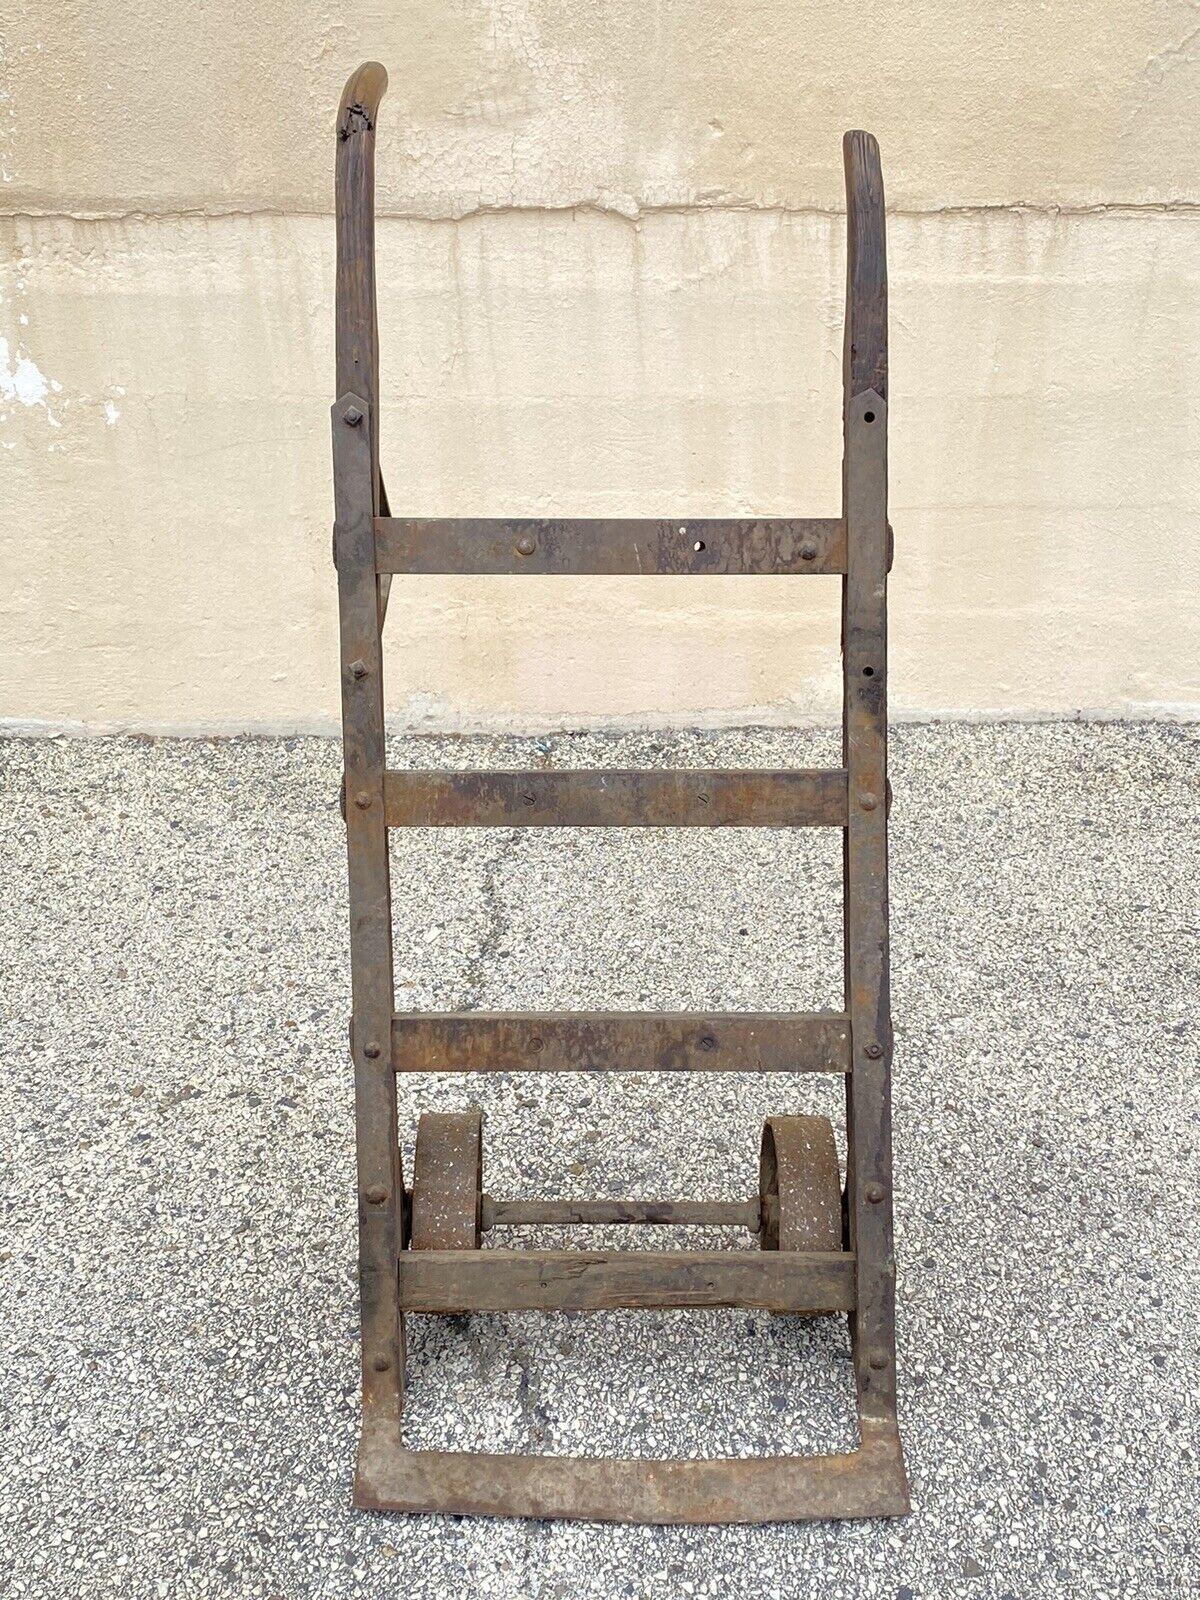 Antique American Industrial Modern Vintage Factory Hand Truck with Oak Wood and Iron Metal Frame. Circa Mid 20th Century.
Measurements: 
Upright: 51